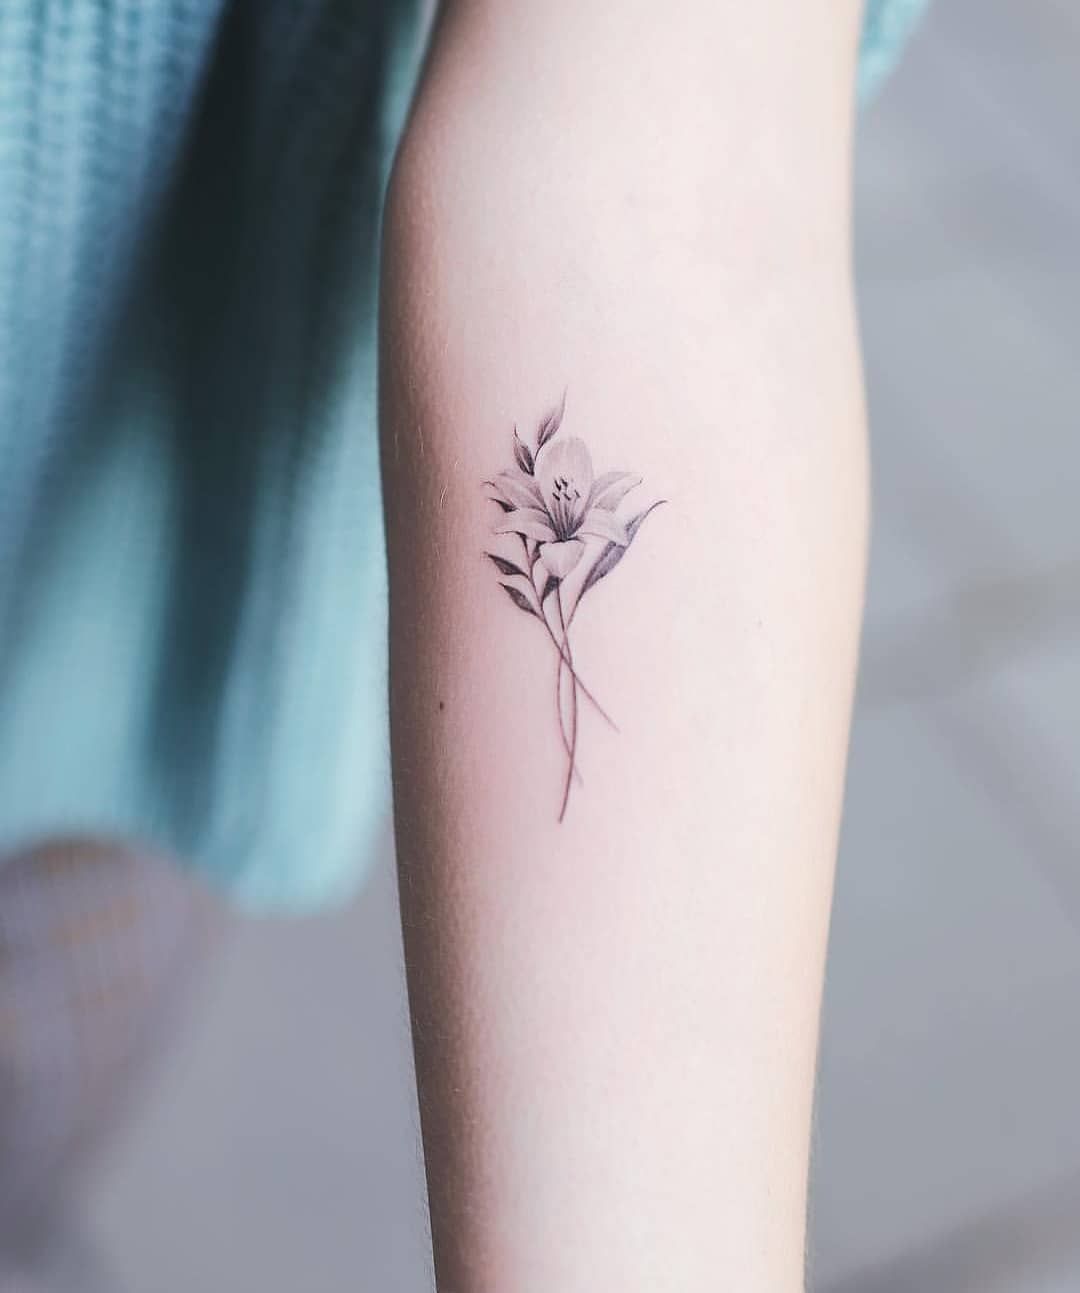 Lily Shoulder Tattoos Meaning Ideas Designs (205)